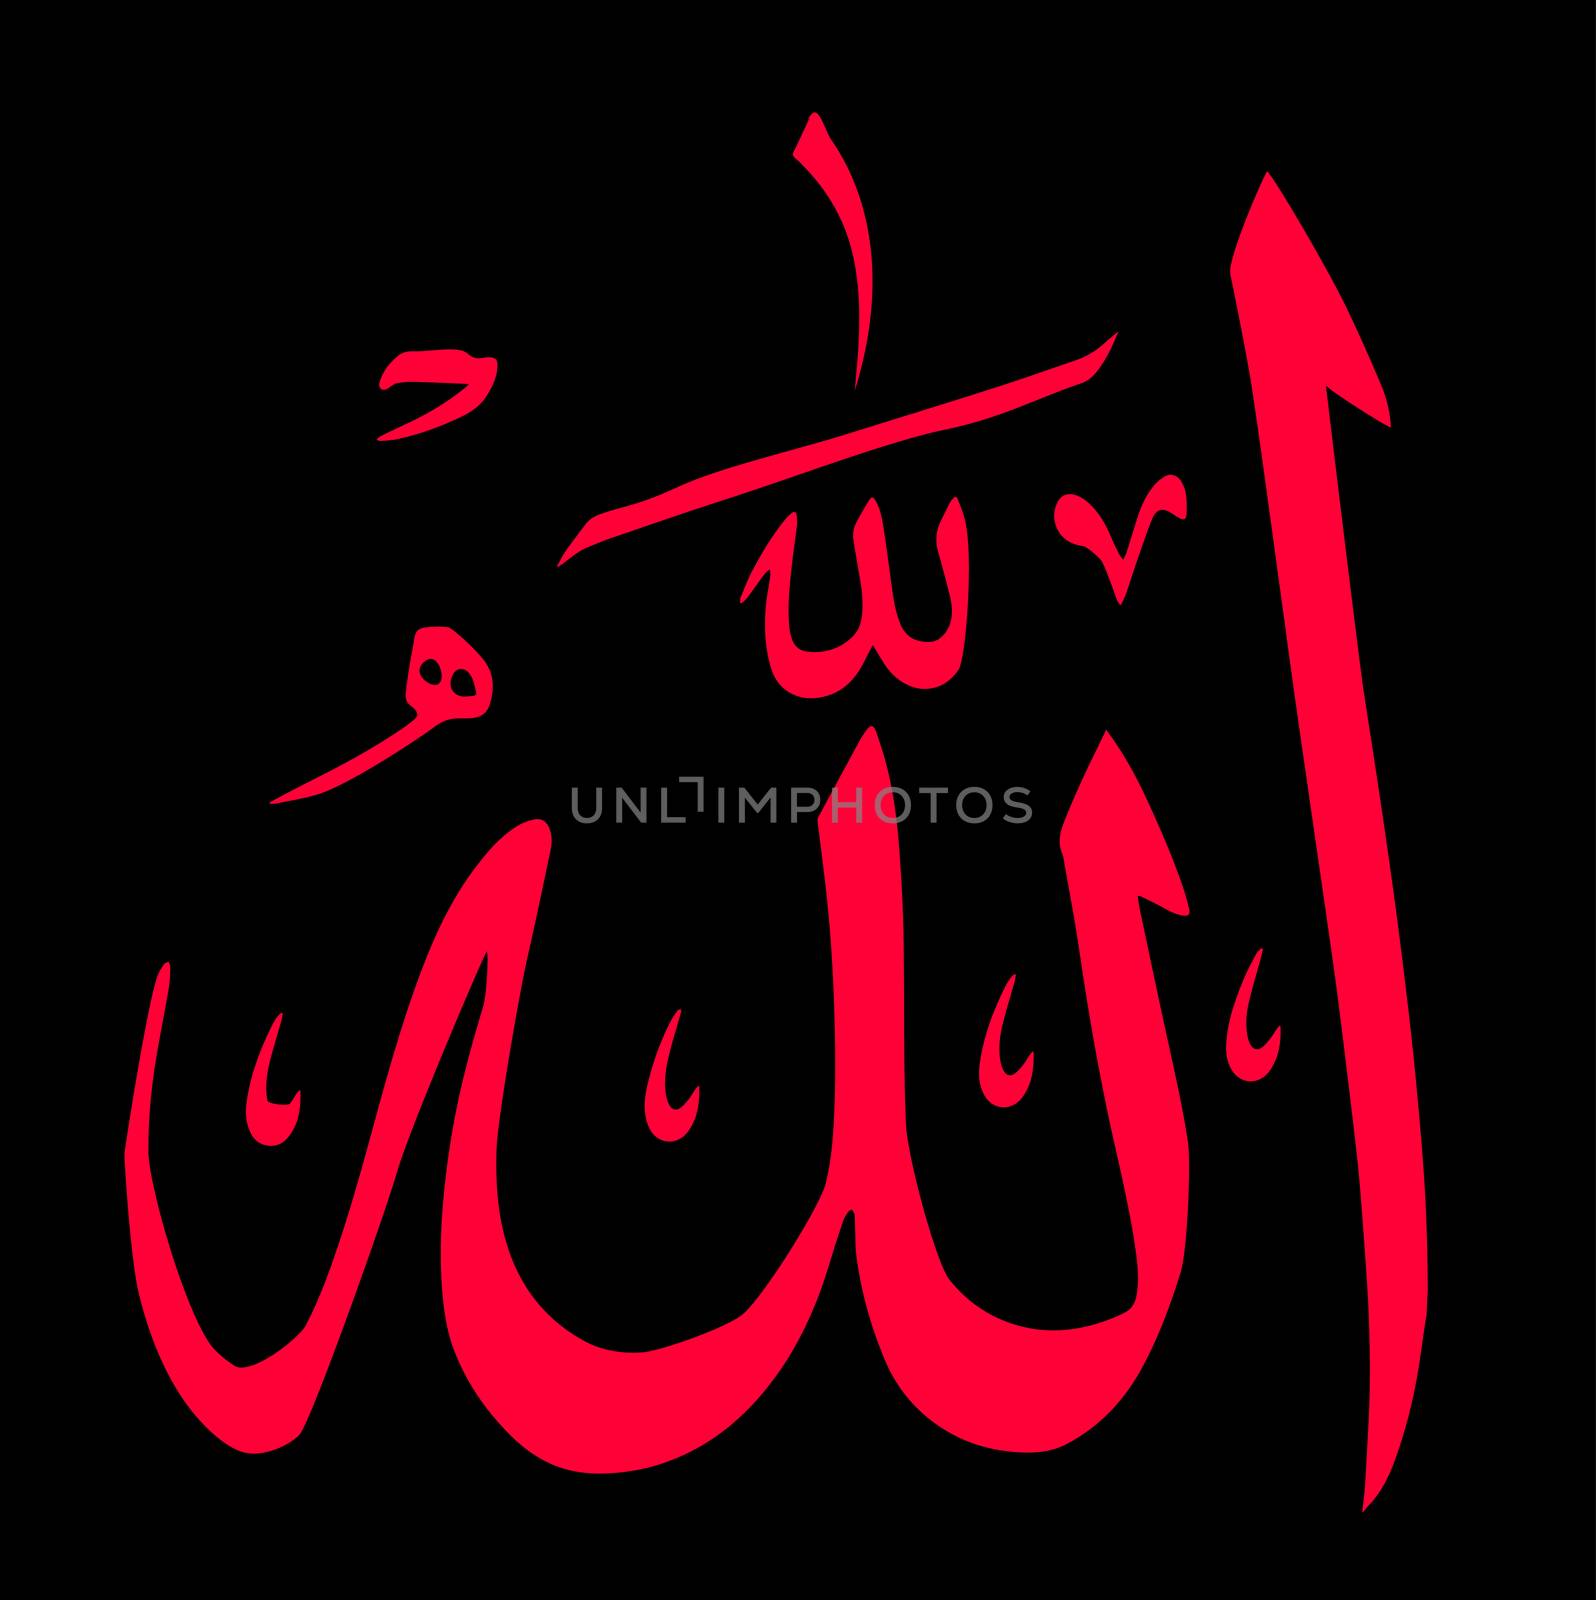 Name of Allah in Arabic script over a black background